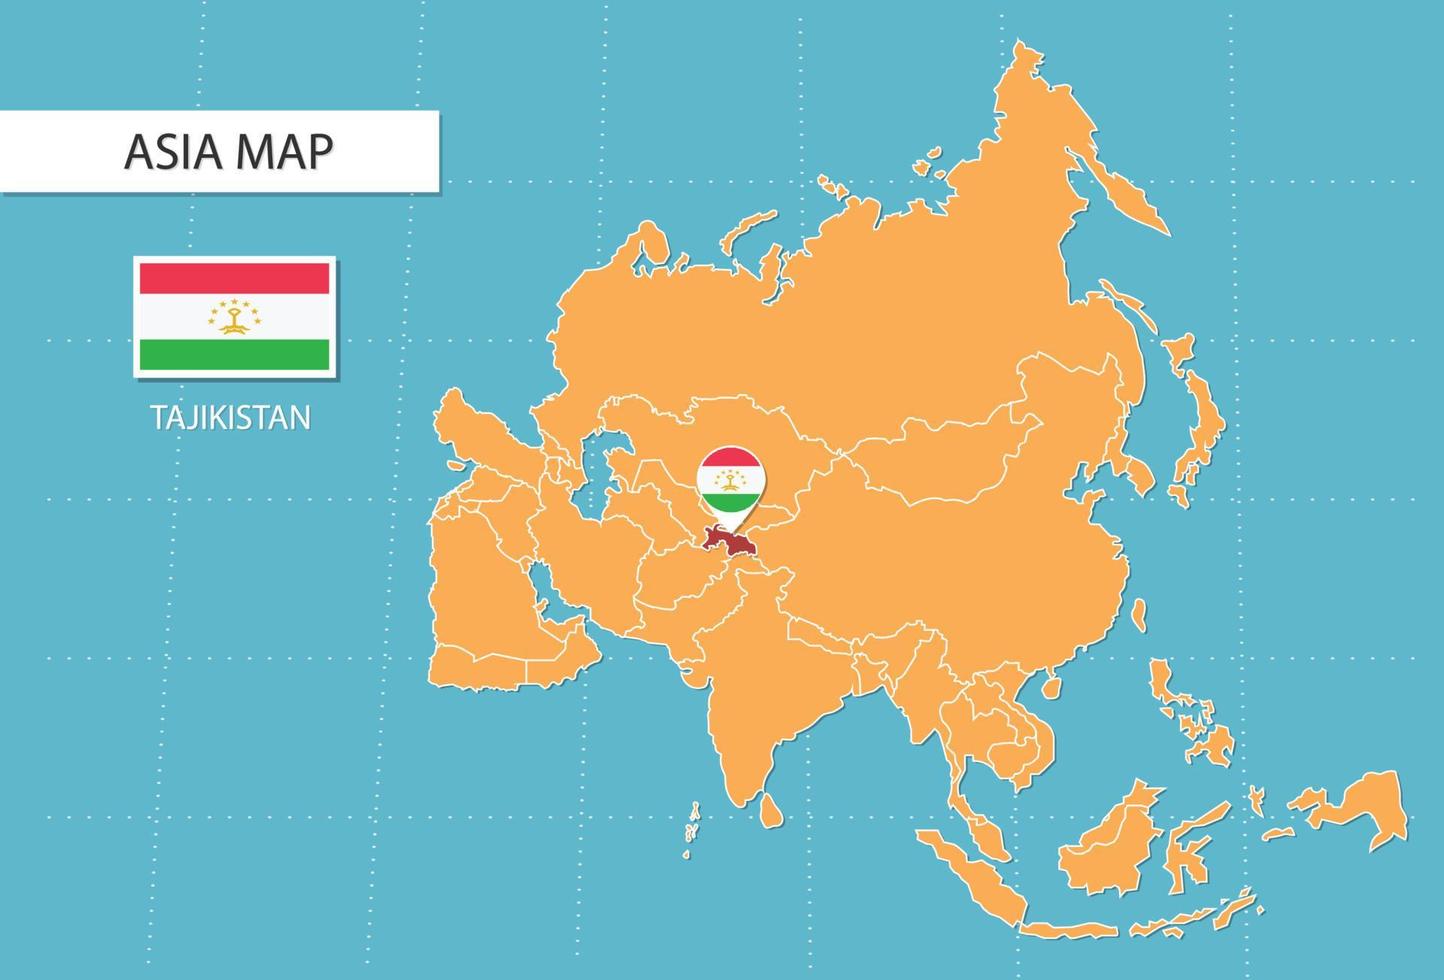 Tajikistan map in Asia, icons showing Tajikistan location and flags. vector